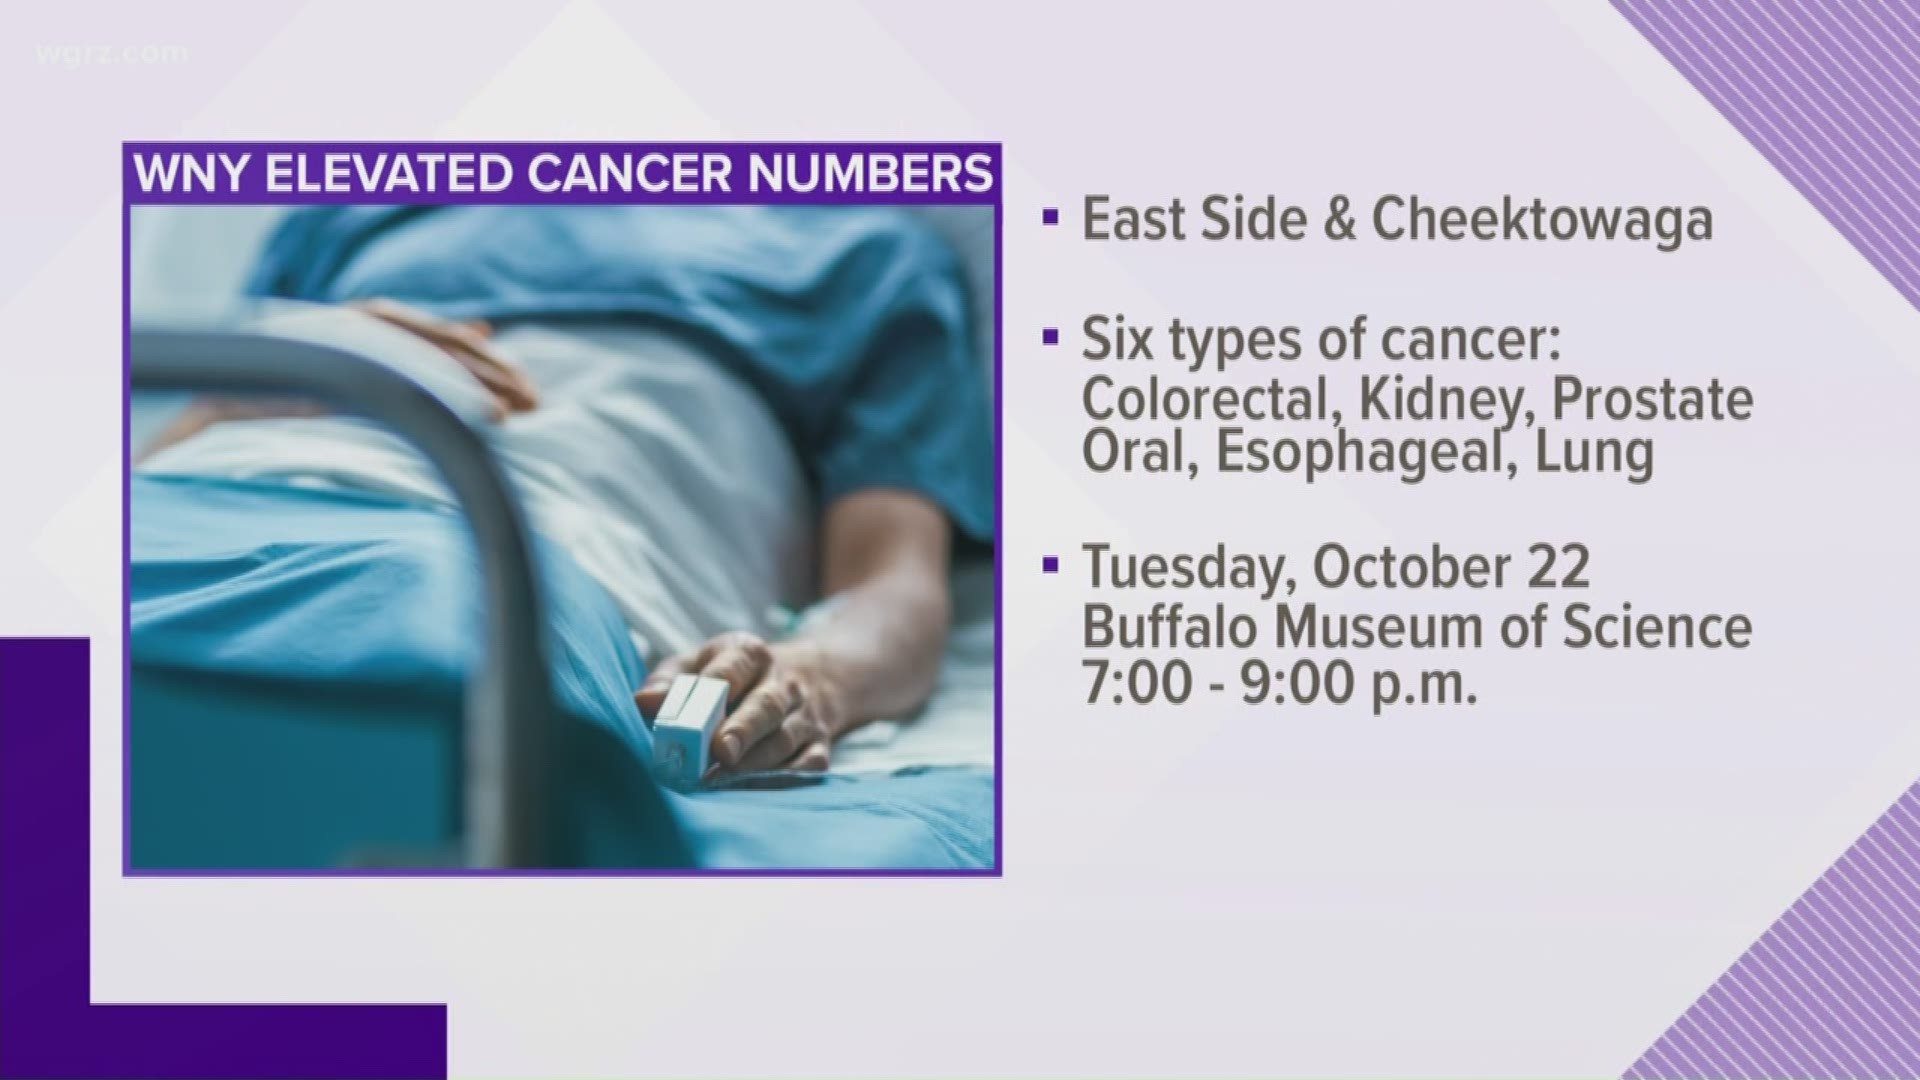 The State Health Department will hold an informational meeting on October 22 at the Buffalo Museum of Science at 7 PM